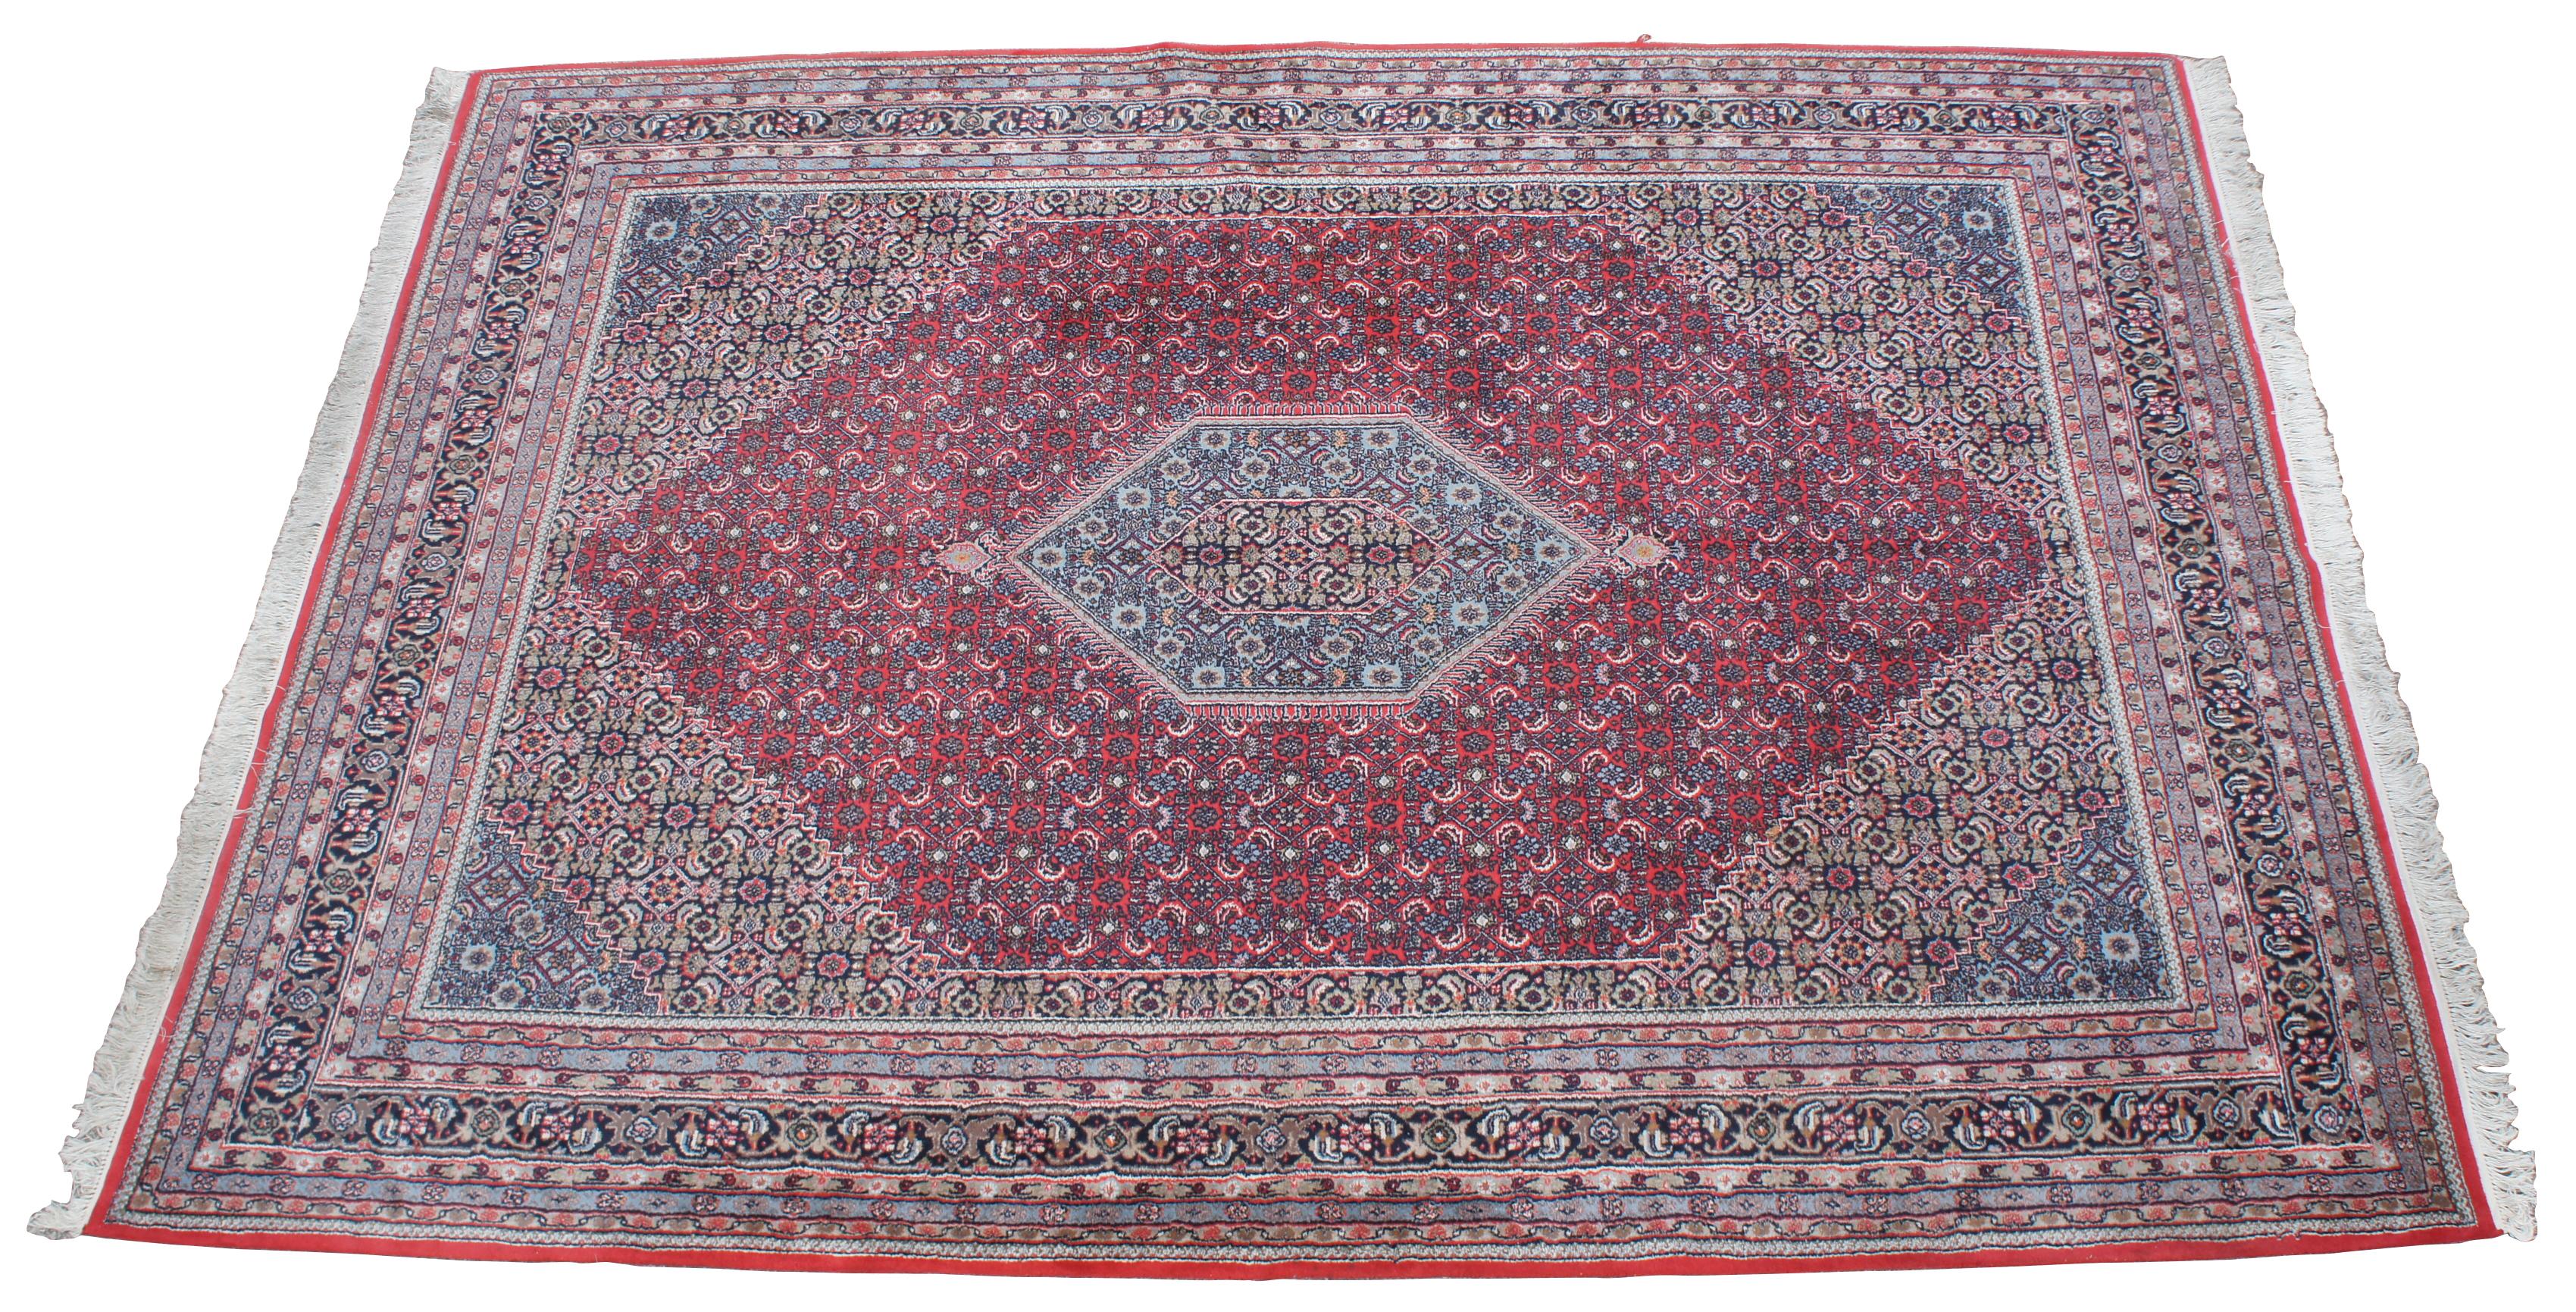 Vintage Persian Tabriz Mahi medallion area rug. Featuring a field of reds, with a central geometric shaped medallion with blues, brown, pink, green and orange accents. Made of wool in the city of Tabriz, east of Azarbaijan Province in north west